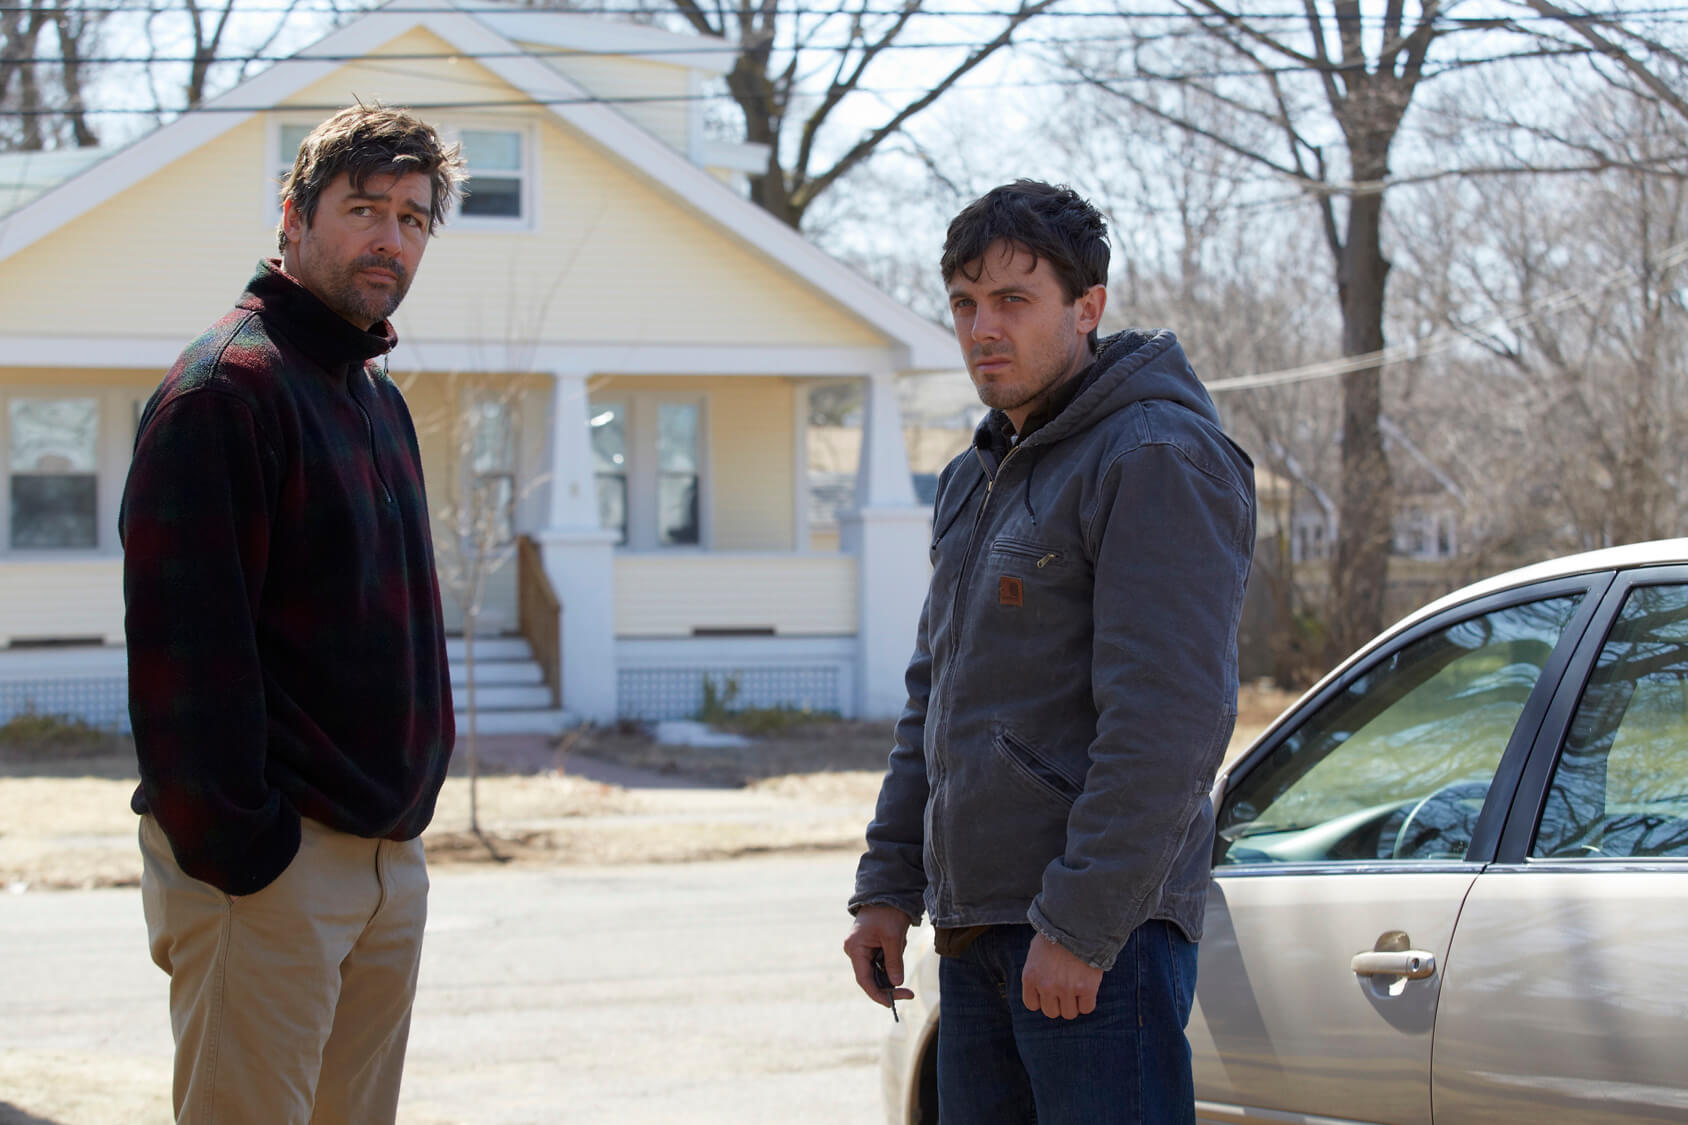 kyle-chandler-casey-affleck-credit_-claire-folger-courtesy-of-amazon-studios-and-roadside-attractions1467243360